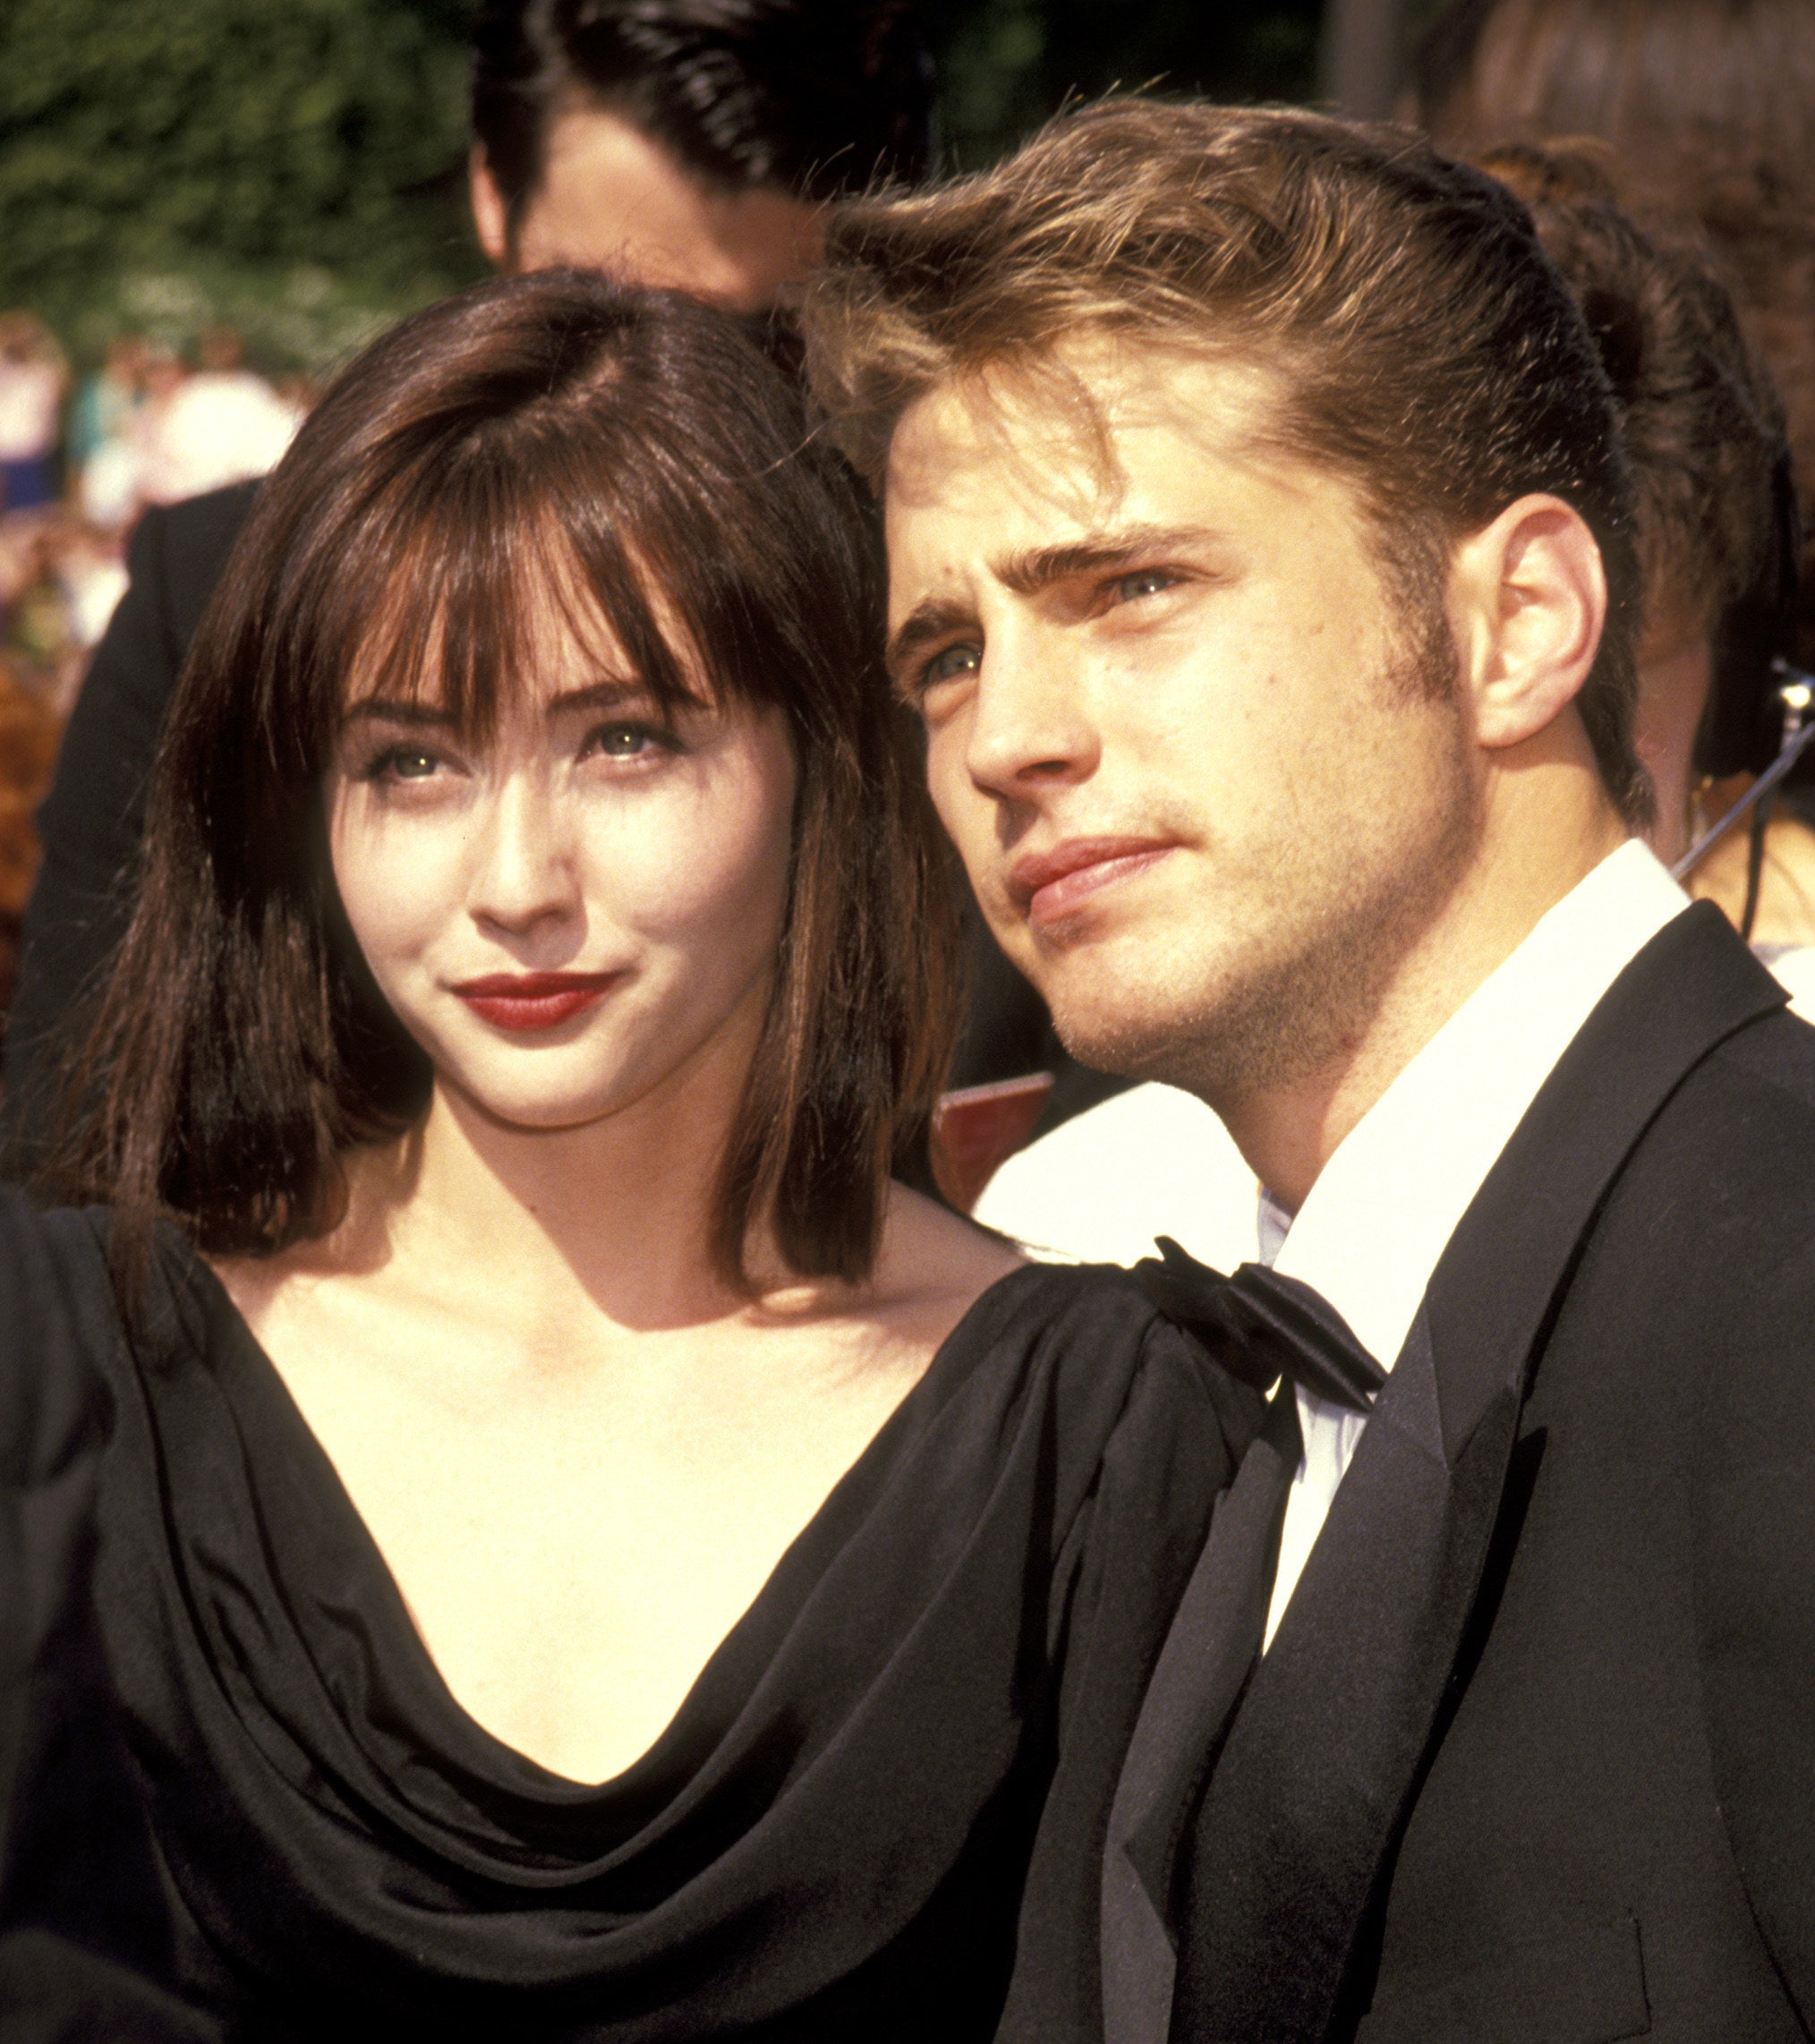 Shannen Doherty and Jason Priestley smiling on the red carpet